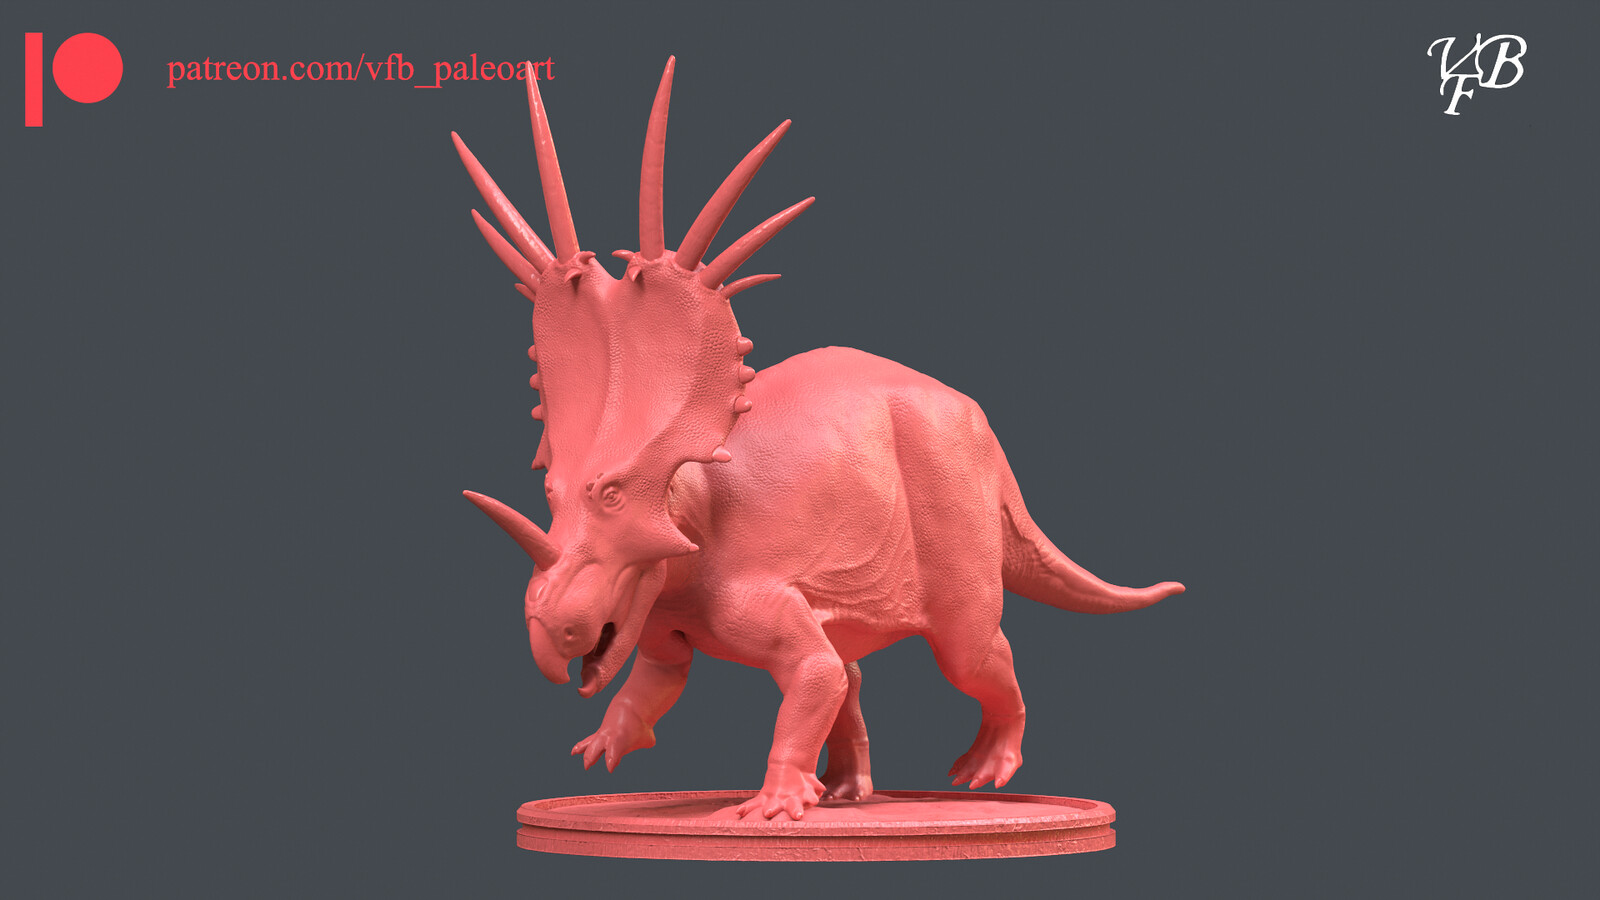 "Red", the offensive Styracosaurus.